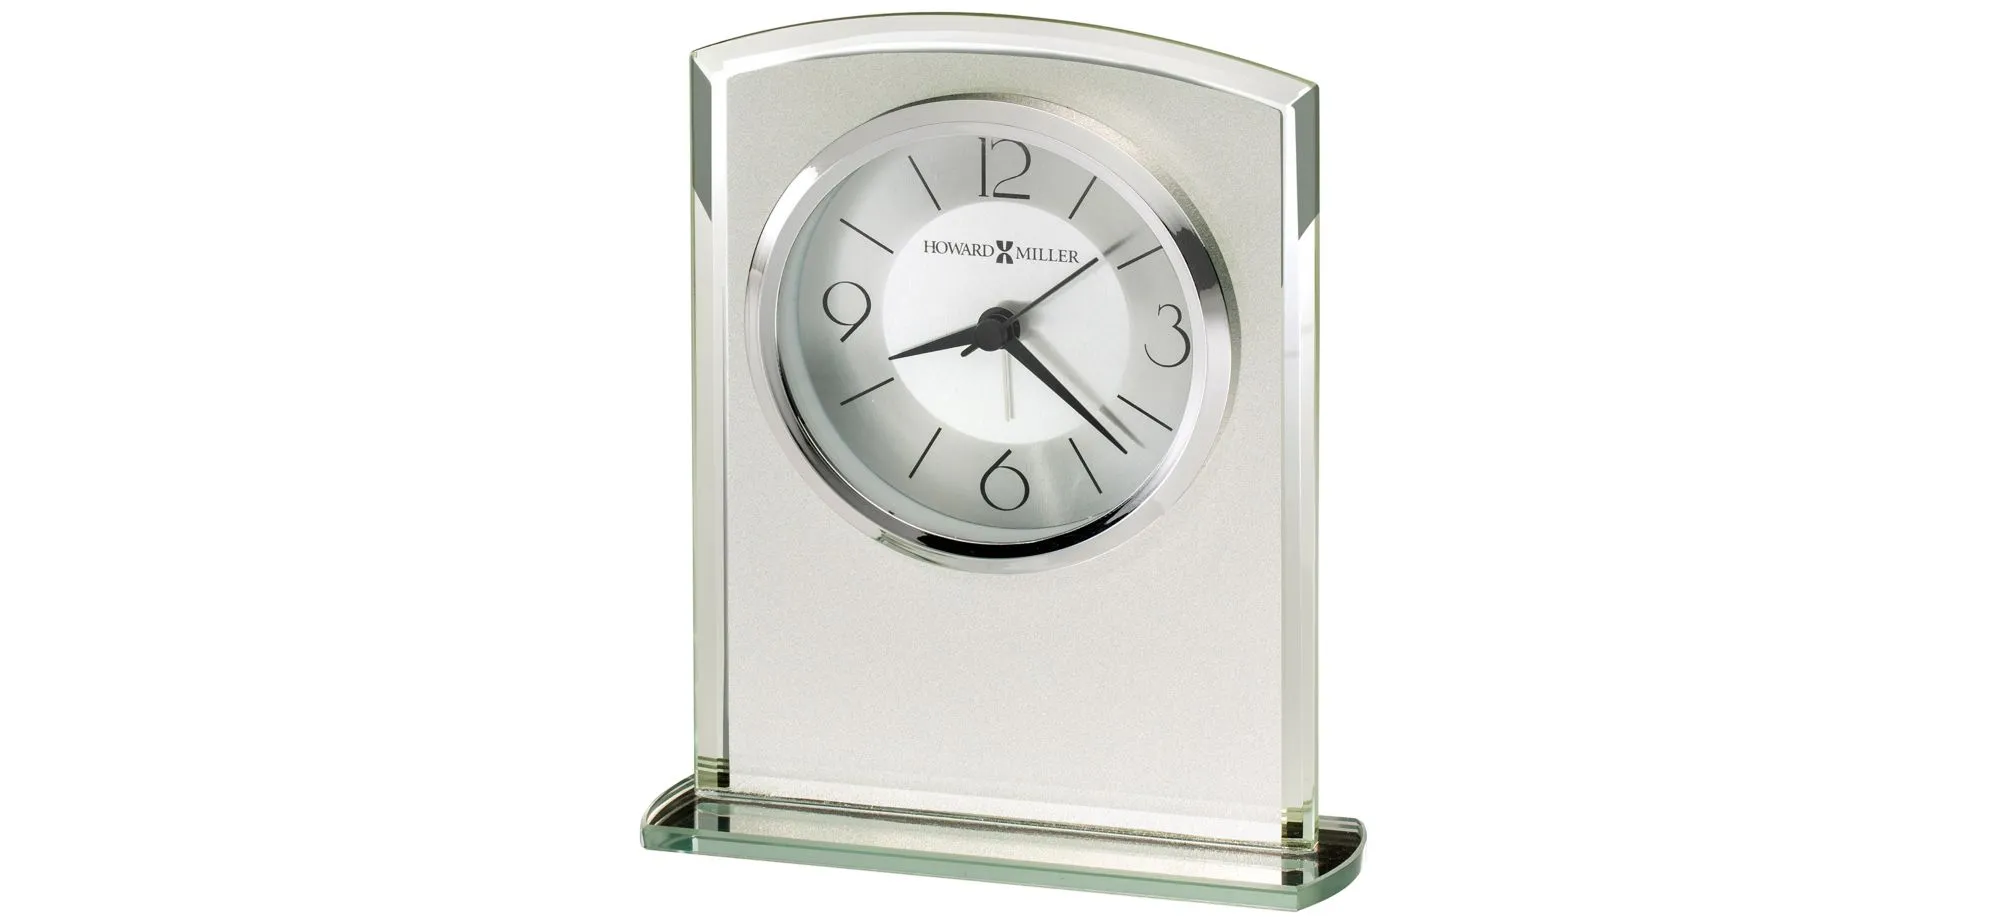 Glamour Tabletop Clock in Silver by Howard Miller